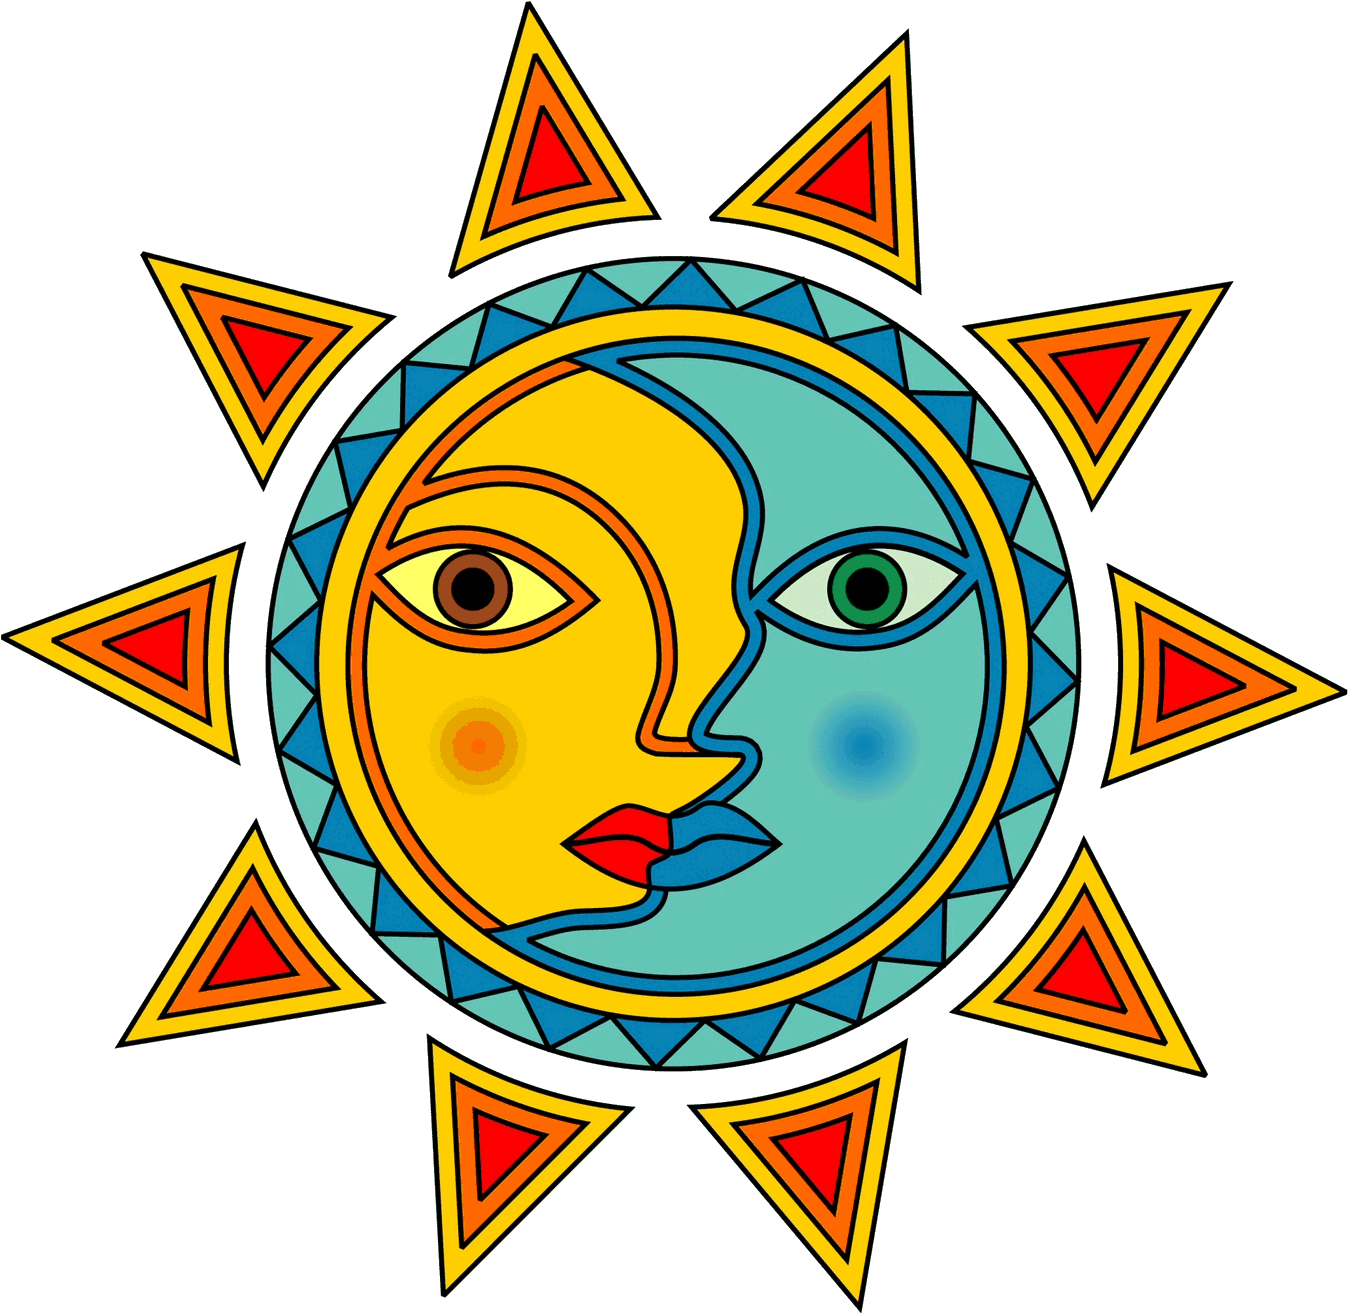 Friday Fiesta - Sun And Moon South America (1431x1400)